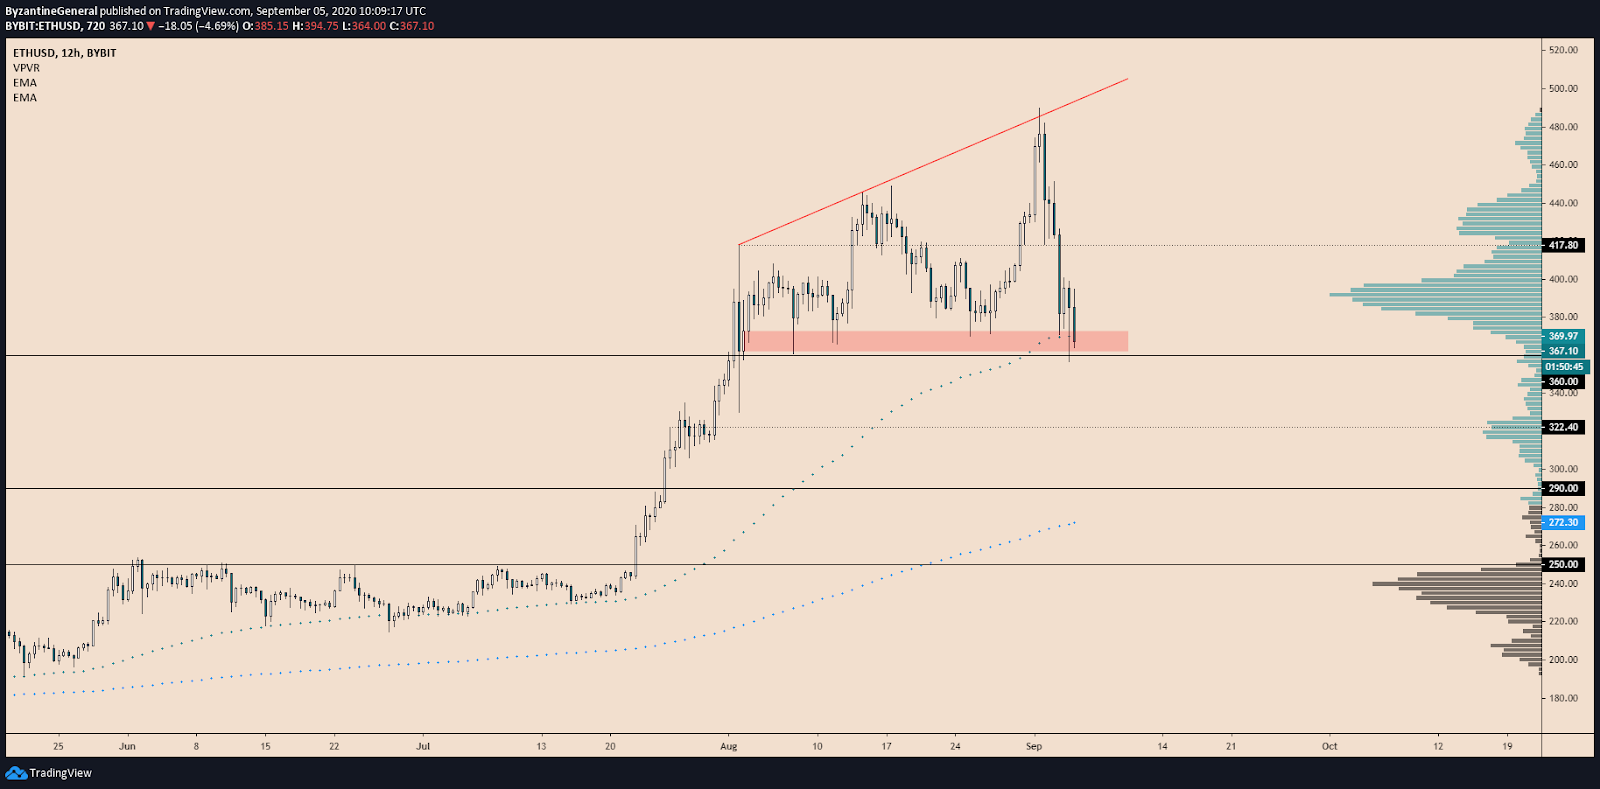 Important technical levels for ETH/USD